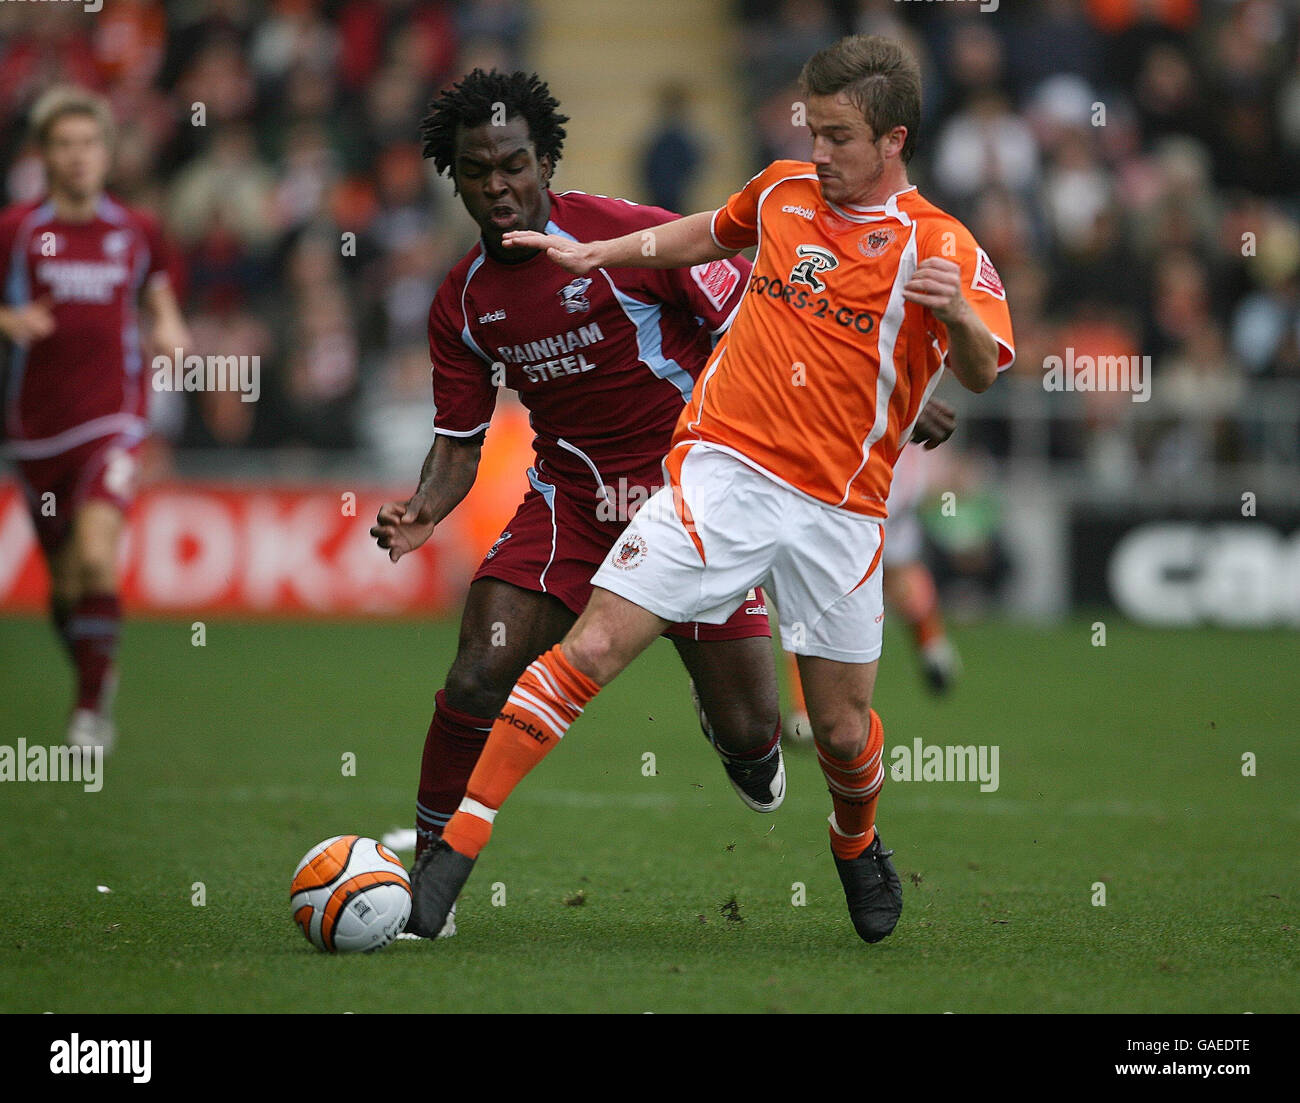 Blackpool's Keigan Parker and Scuntorpe United's Kelly Youga during the Coca-Cola Football League Championship match at Bloomfield Road, Blackpool. Stock Photo